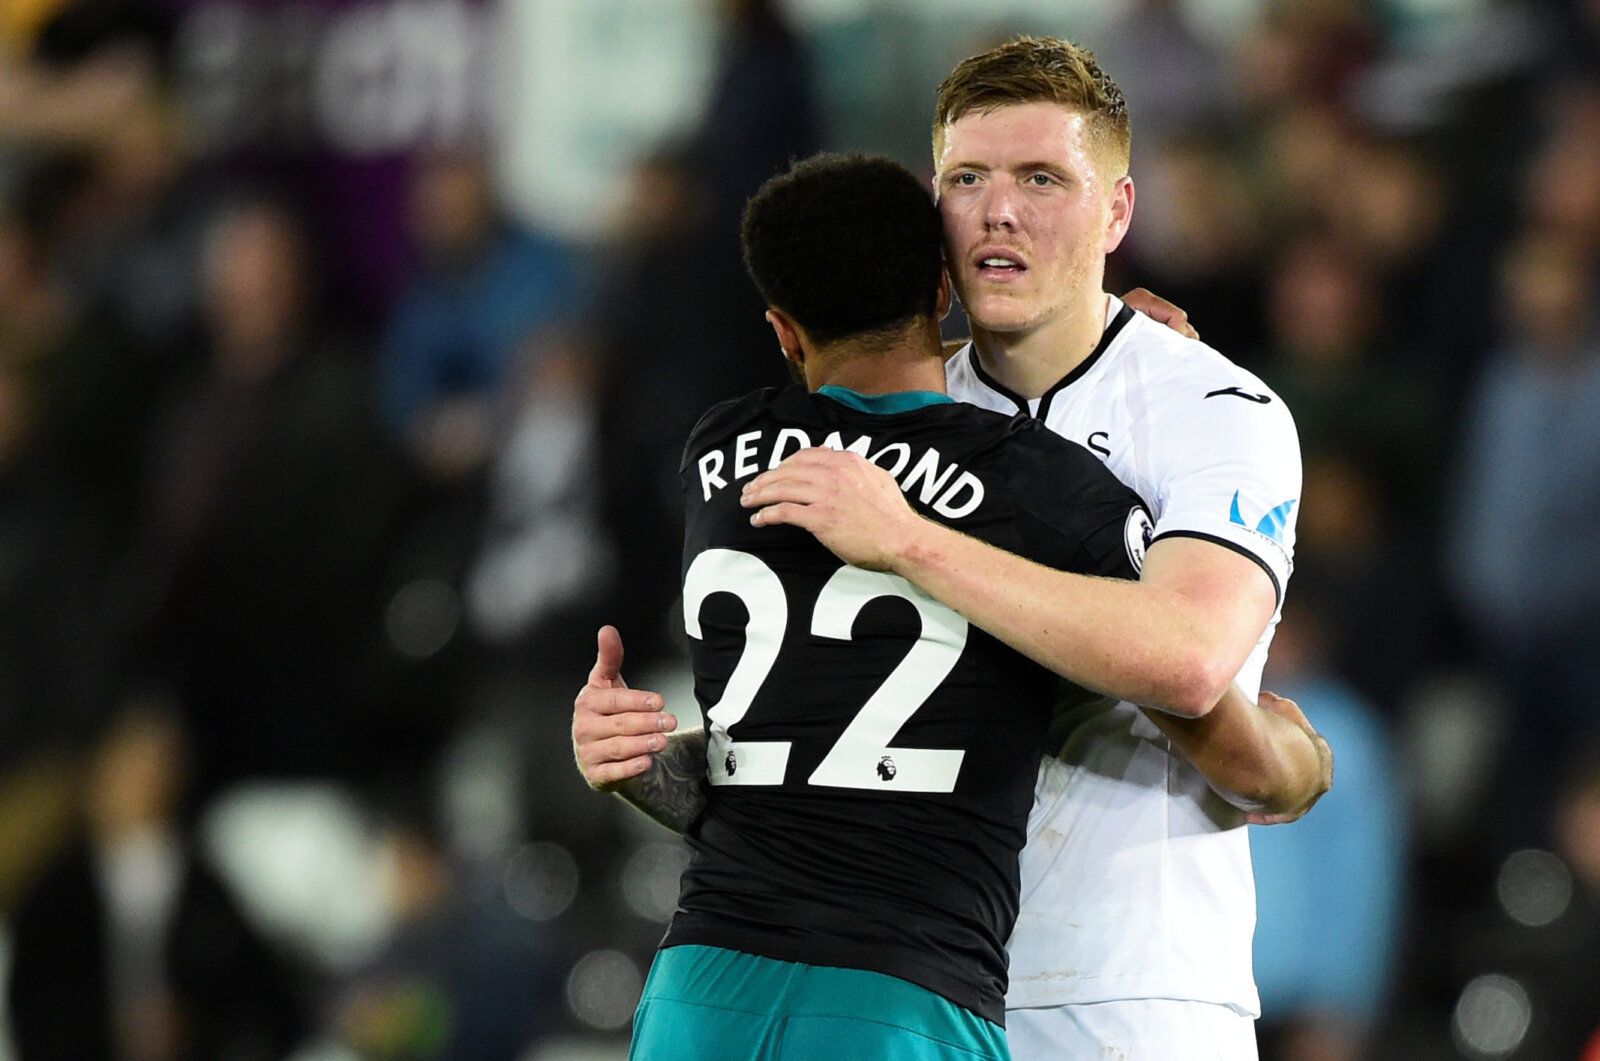 Soccer Football - Premier League - Swansea City v Southampton - Liberty Stadium, Swansea, Britain - May 8, 2018   Swansea City's Alfie Mawson hugs Southampton's Nathan Redmond after the match   REUTERS/Rebecca Naden    EDITORIAL USE ONLY. No use with unauthorized audio, video, data, fixture lists, club/league logos or 